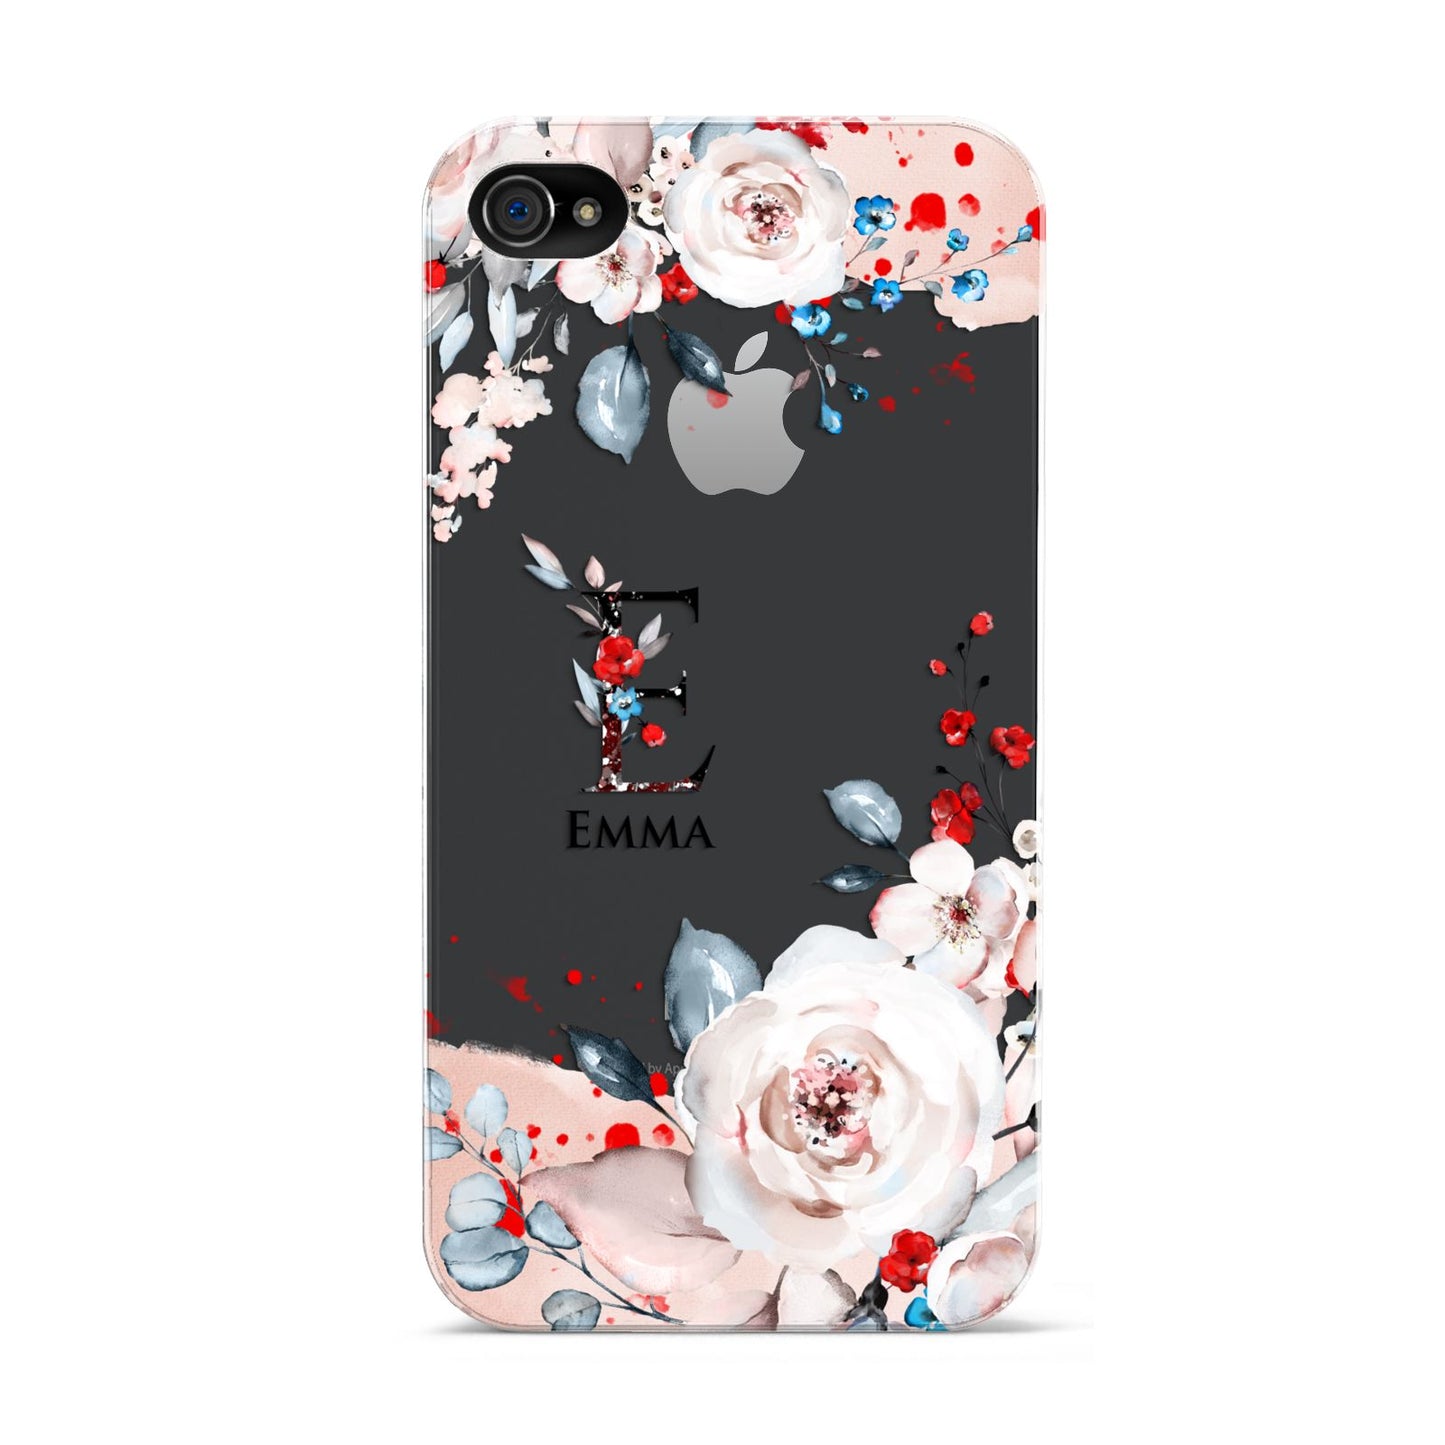 Monogrammed Roses Floral Wreath Apple iPhone 4s Case